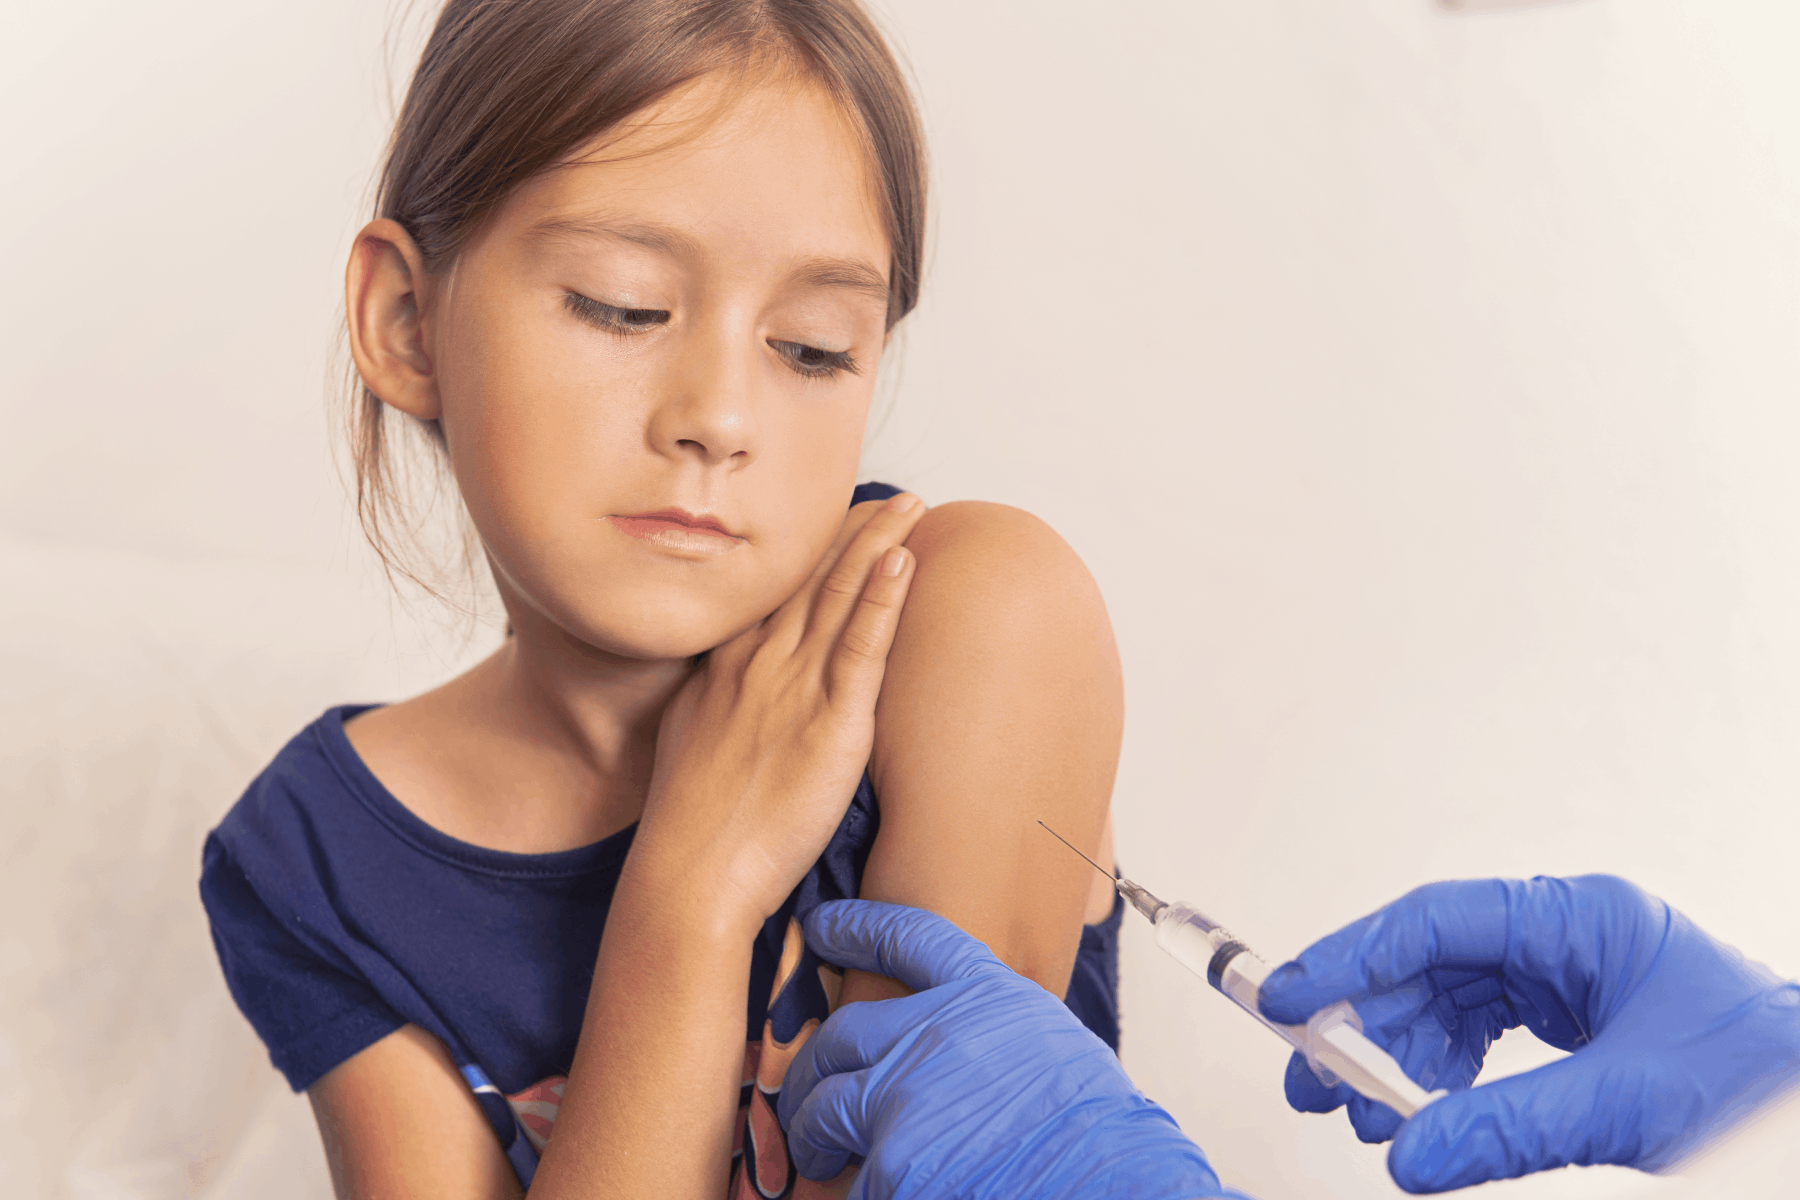 the girl is given a vaccine